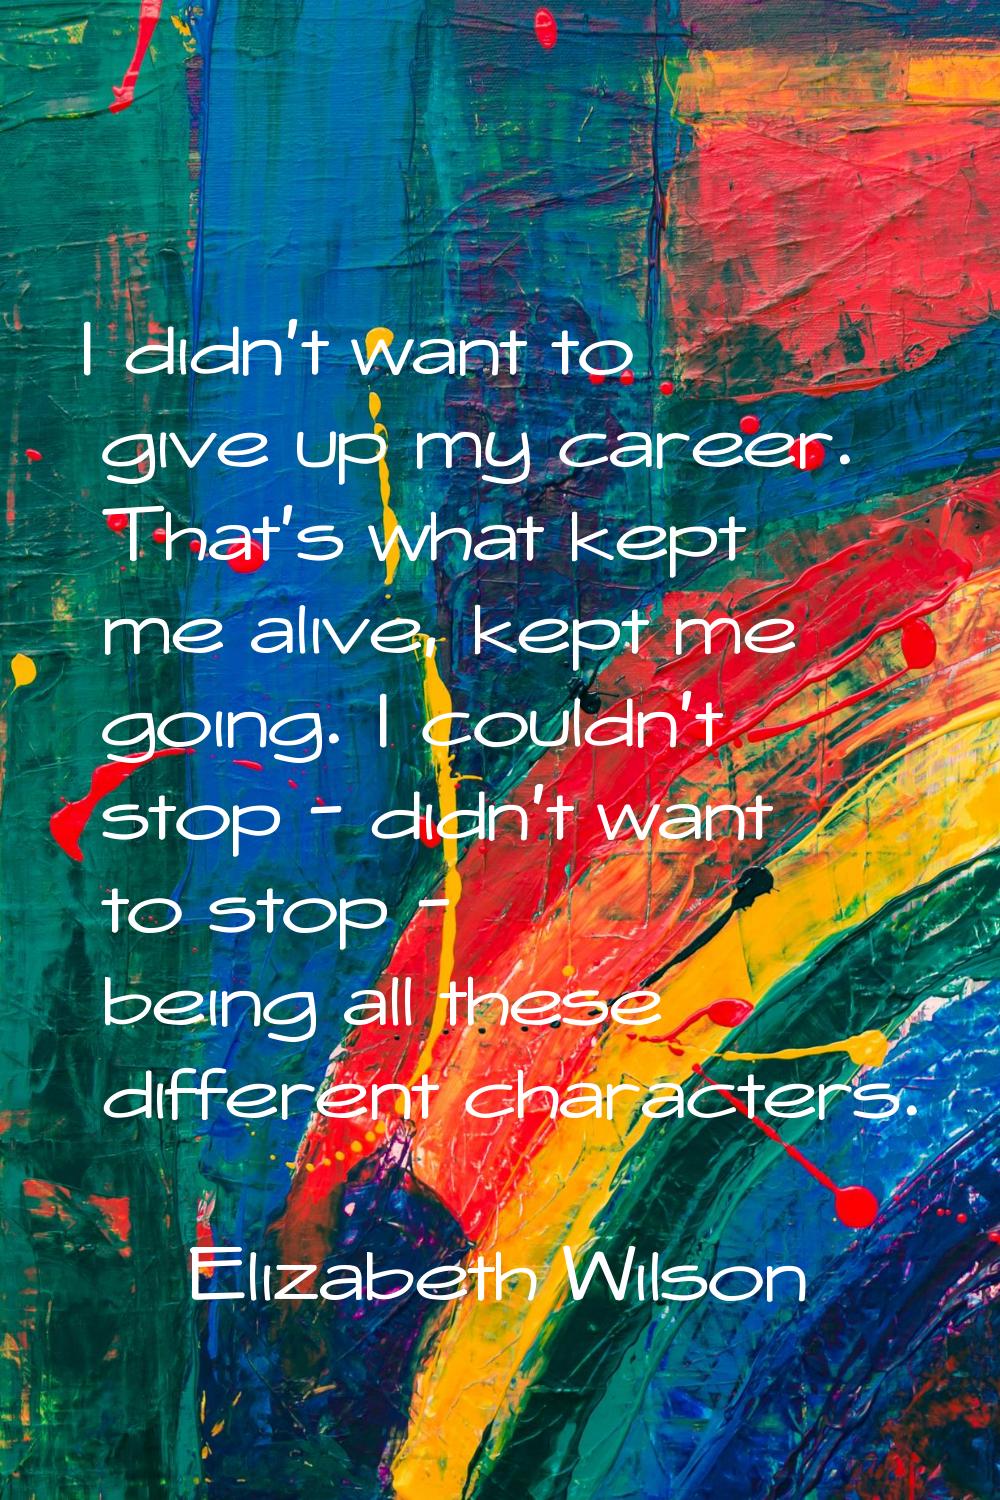 I didn't want to give up my career. That's what kept me alive, kept me going. I couldn't stop - did